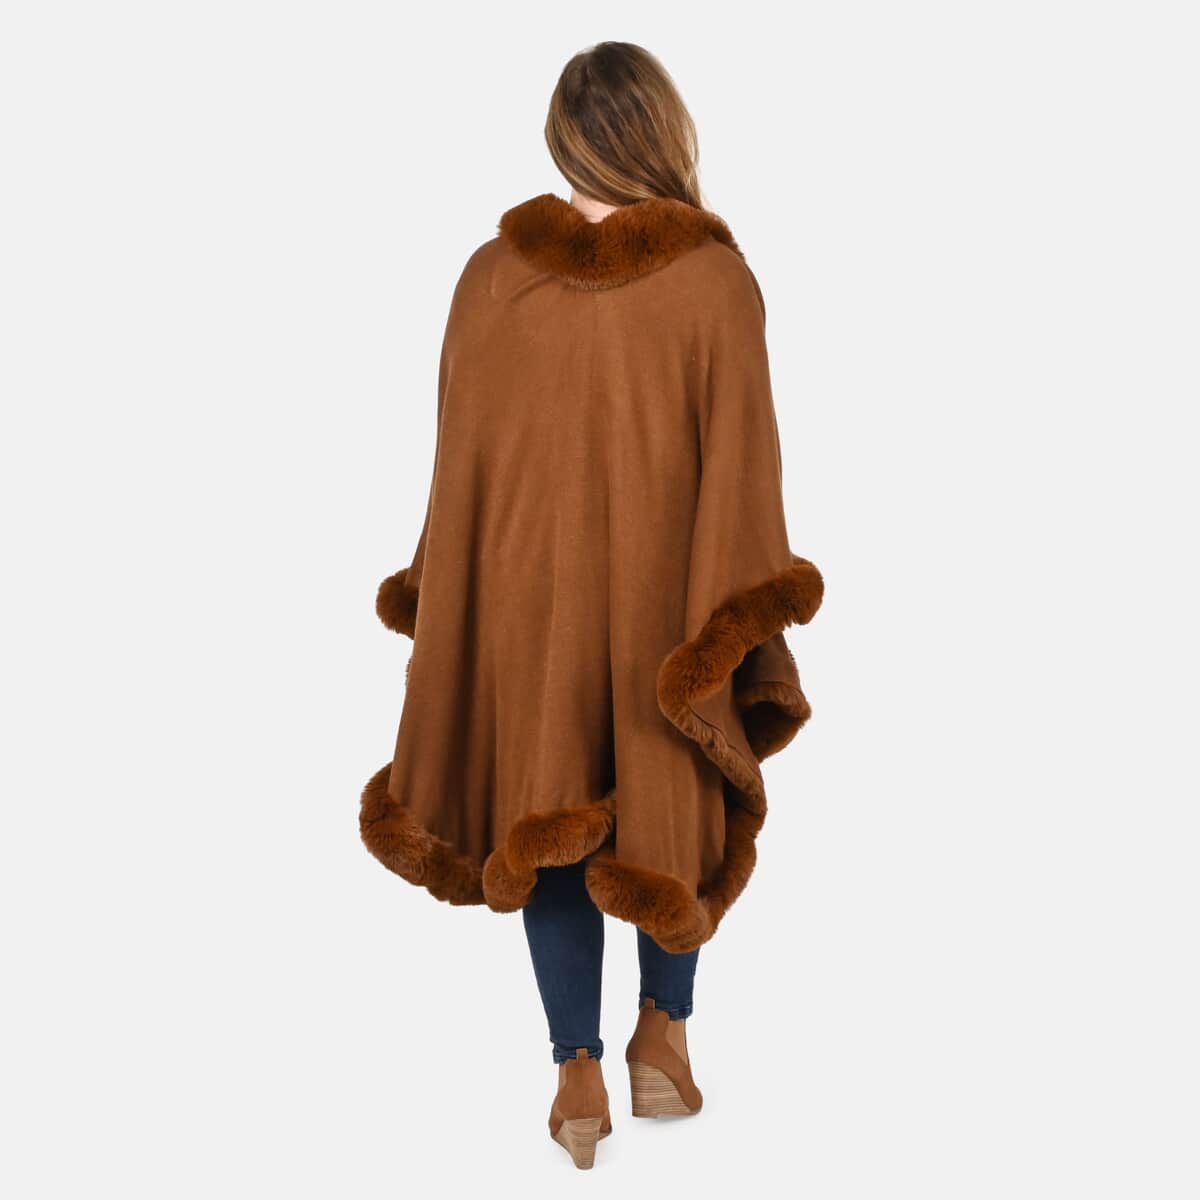 Tamsy Cognac Ruana with Faux Fur Trim - One Size Fits Most image number 1